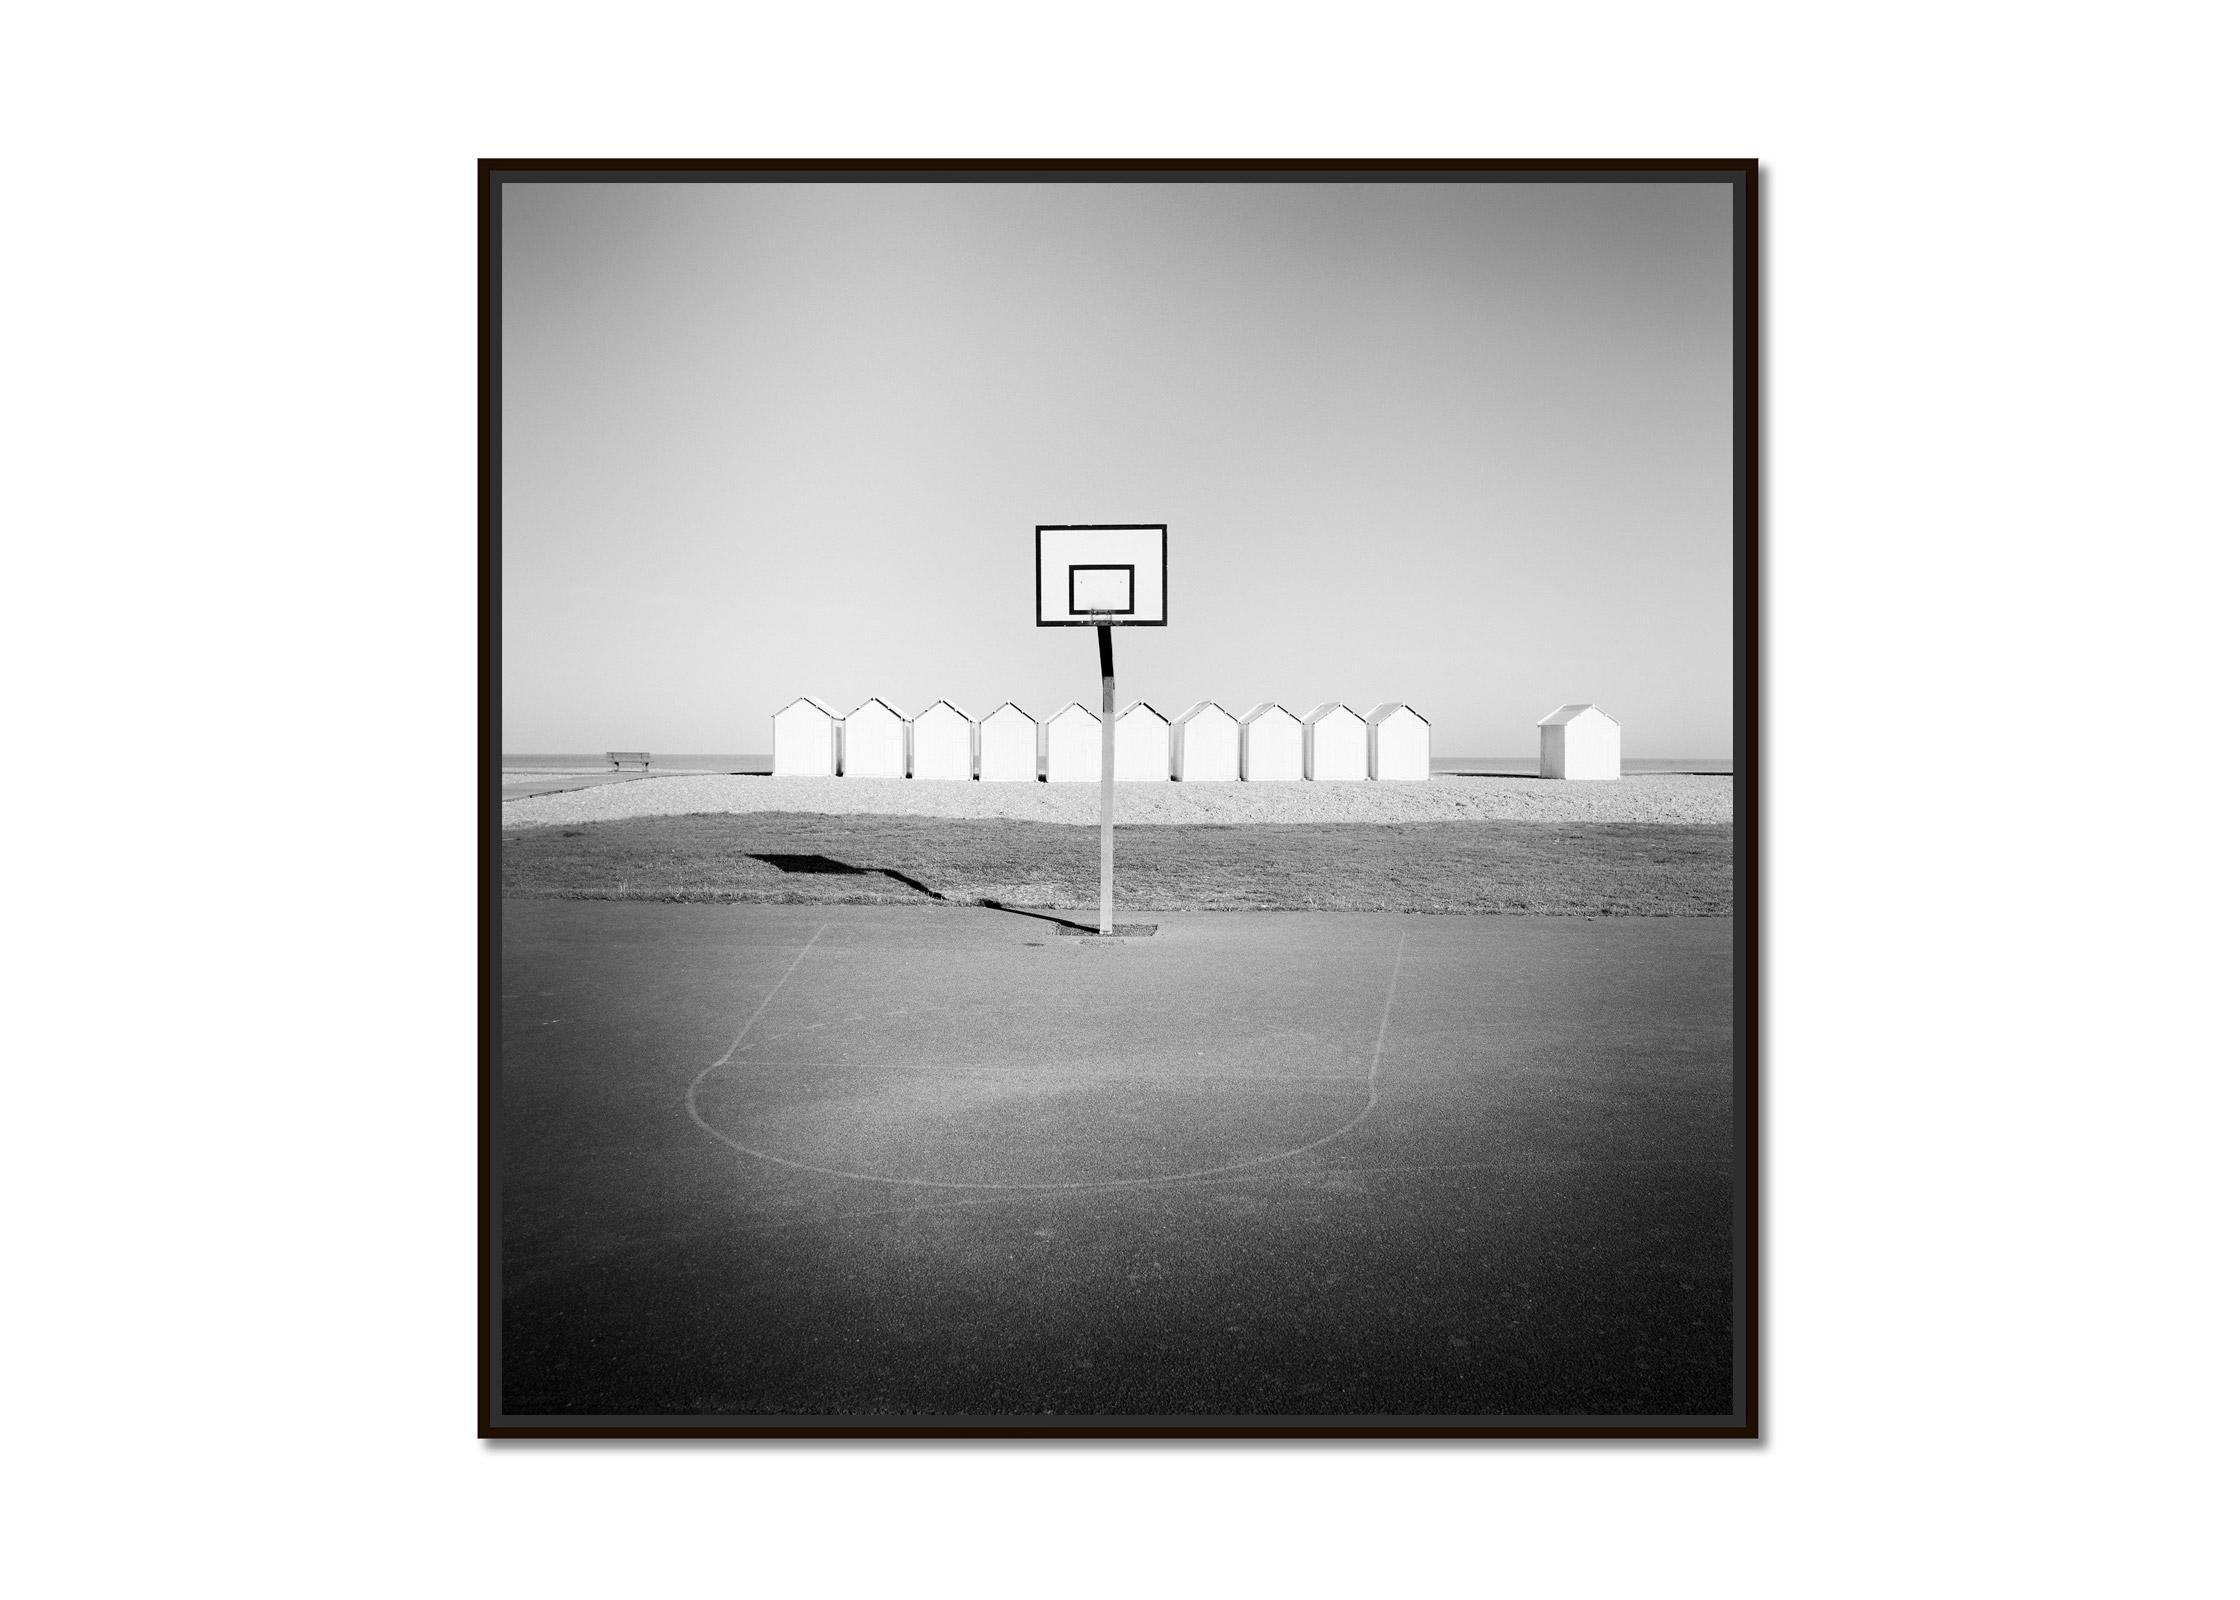 Playground, Beach Huts, Basketball, France, black white landscape photography - Photograph by Gerald Berghammer